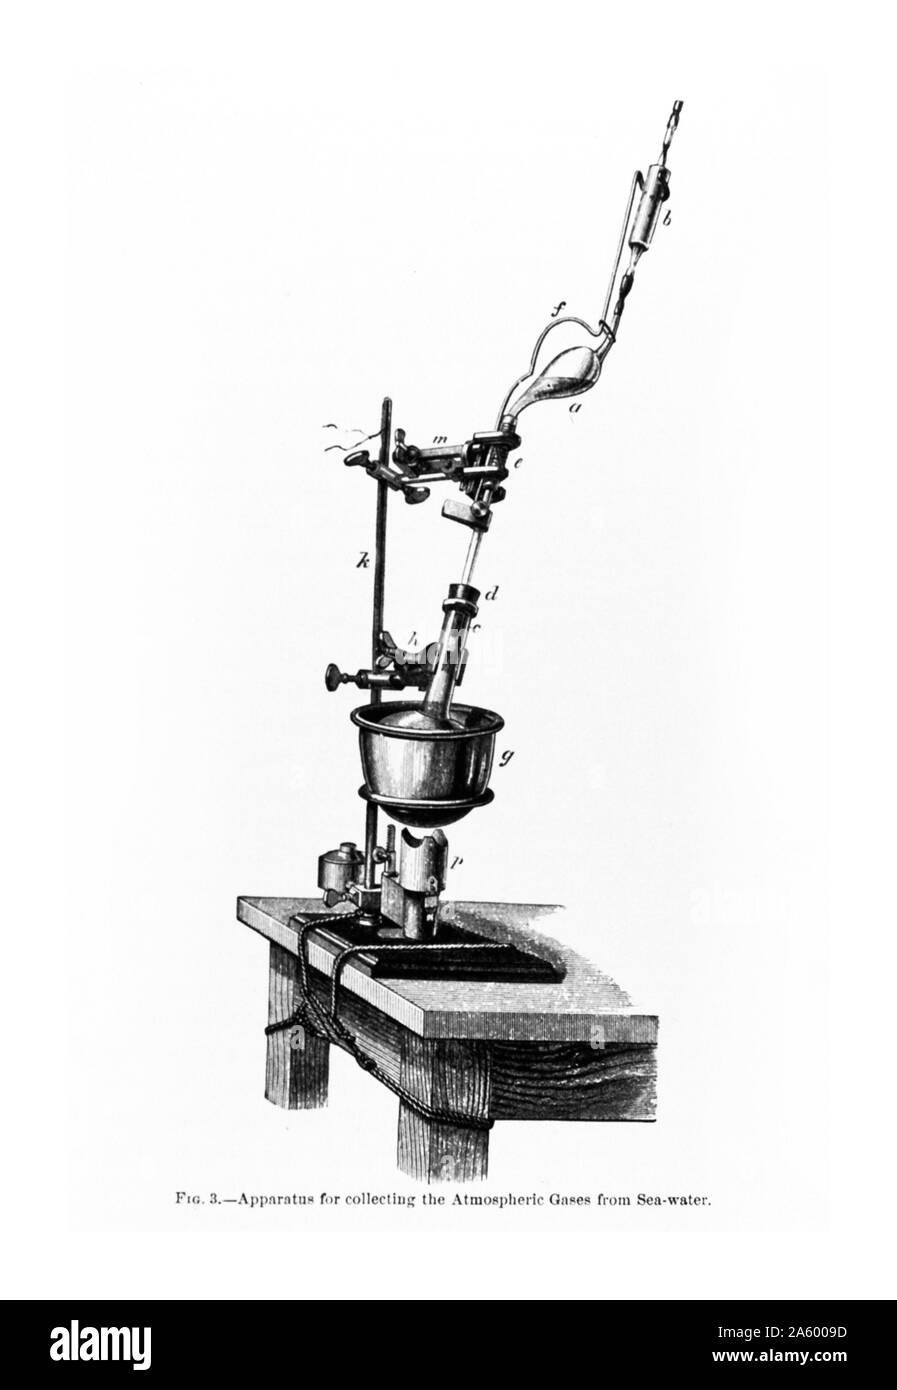 The apparatus for collecting the atmospheric gases from sea-water. In: 'The Voyage of the CHALLENGER - The Atlantic' Vol I, by Sir C. Wyville Thomson, 1878 Stock Photo